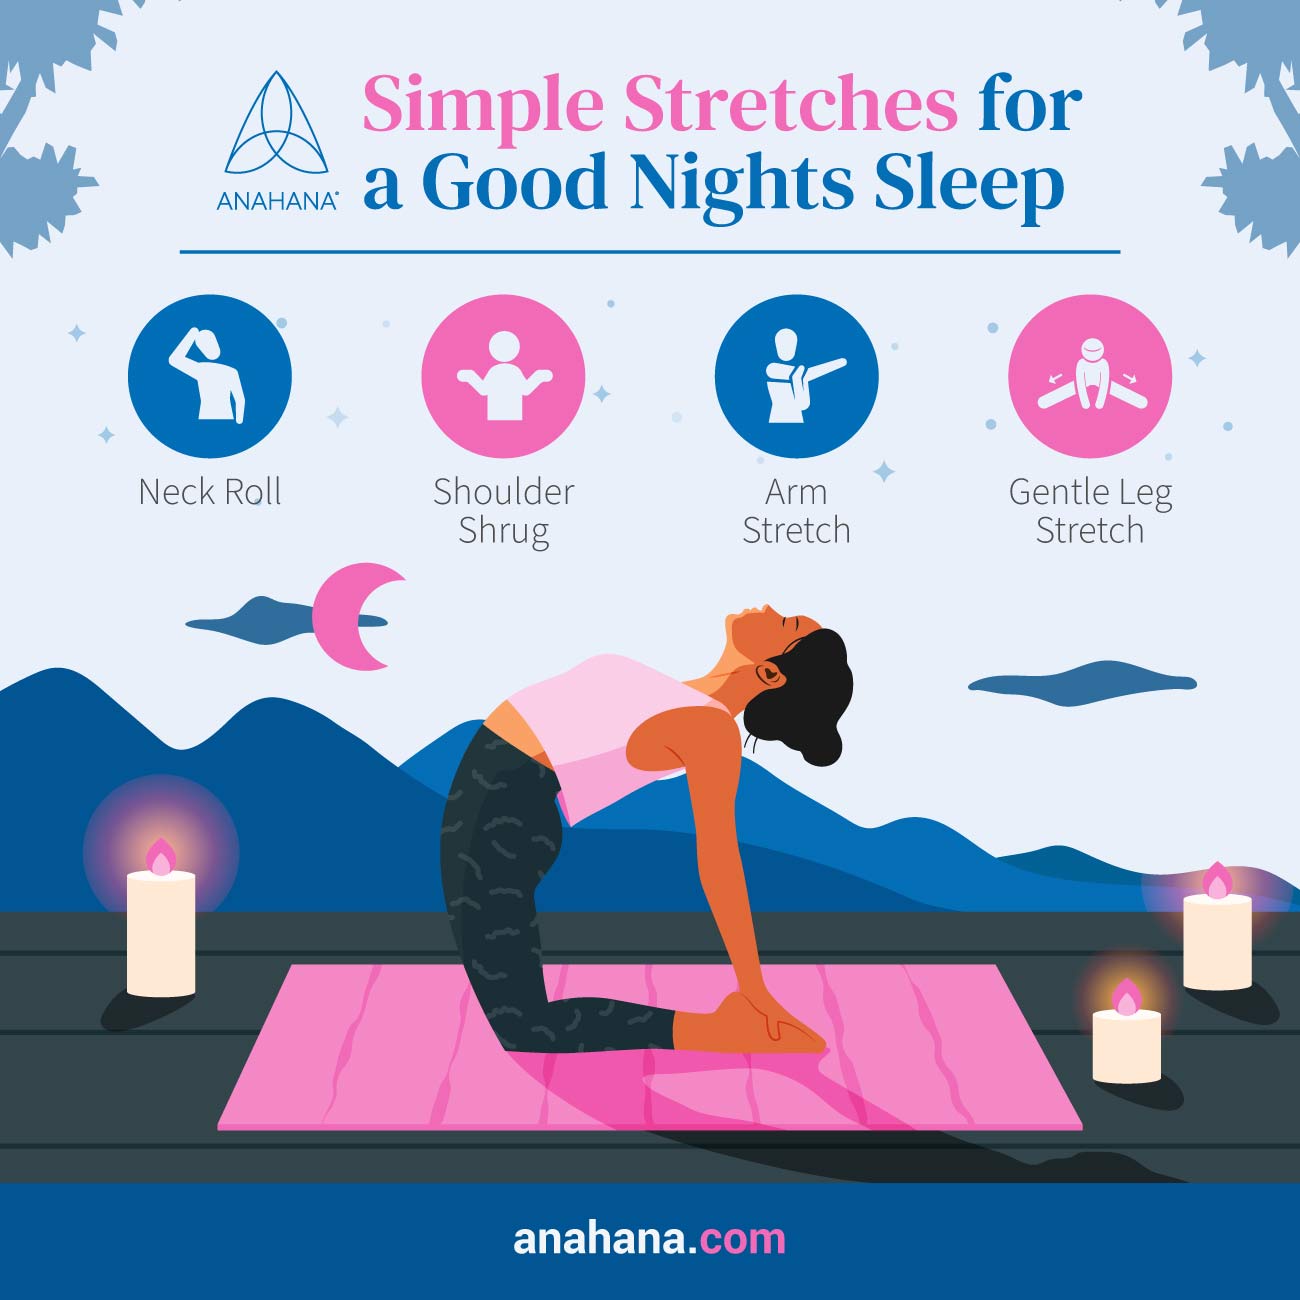 5 Yoga Poses to Try before Bed for Better Sleep